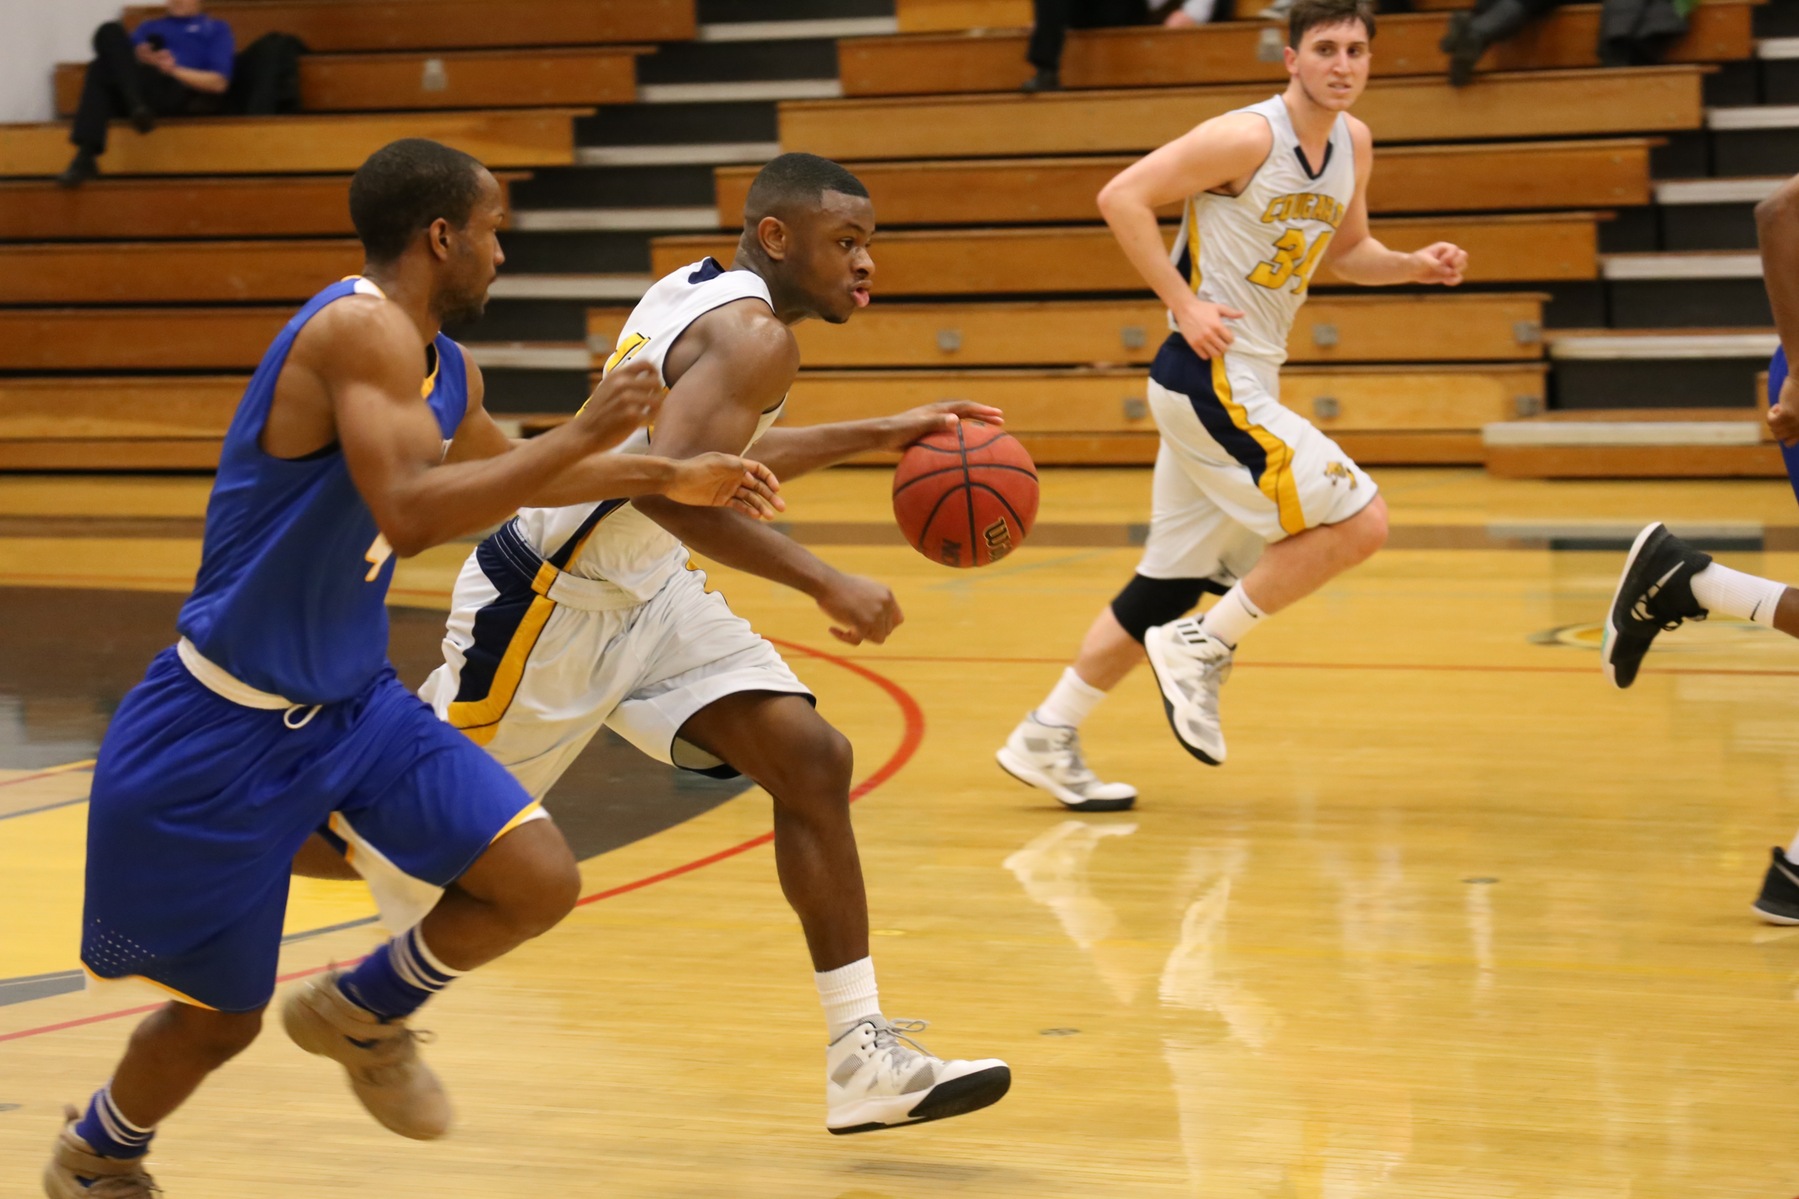 Canyons Freshman Michael Kalu Named CCCMBCA All-State Honorable Mention